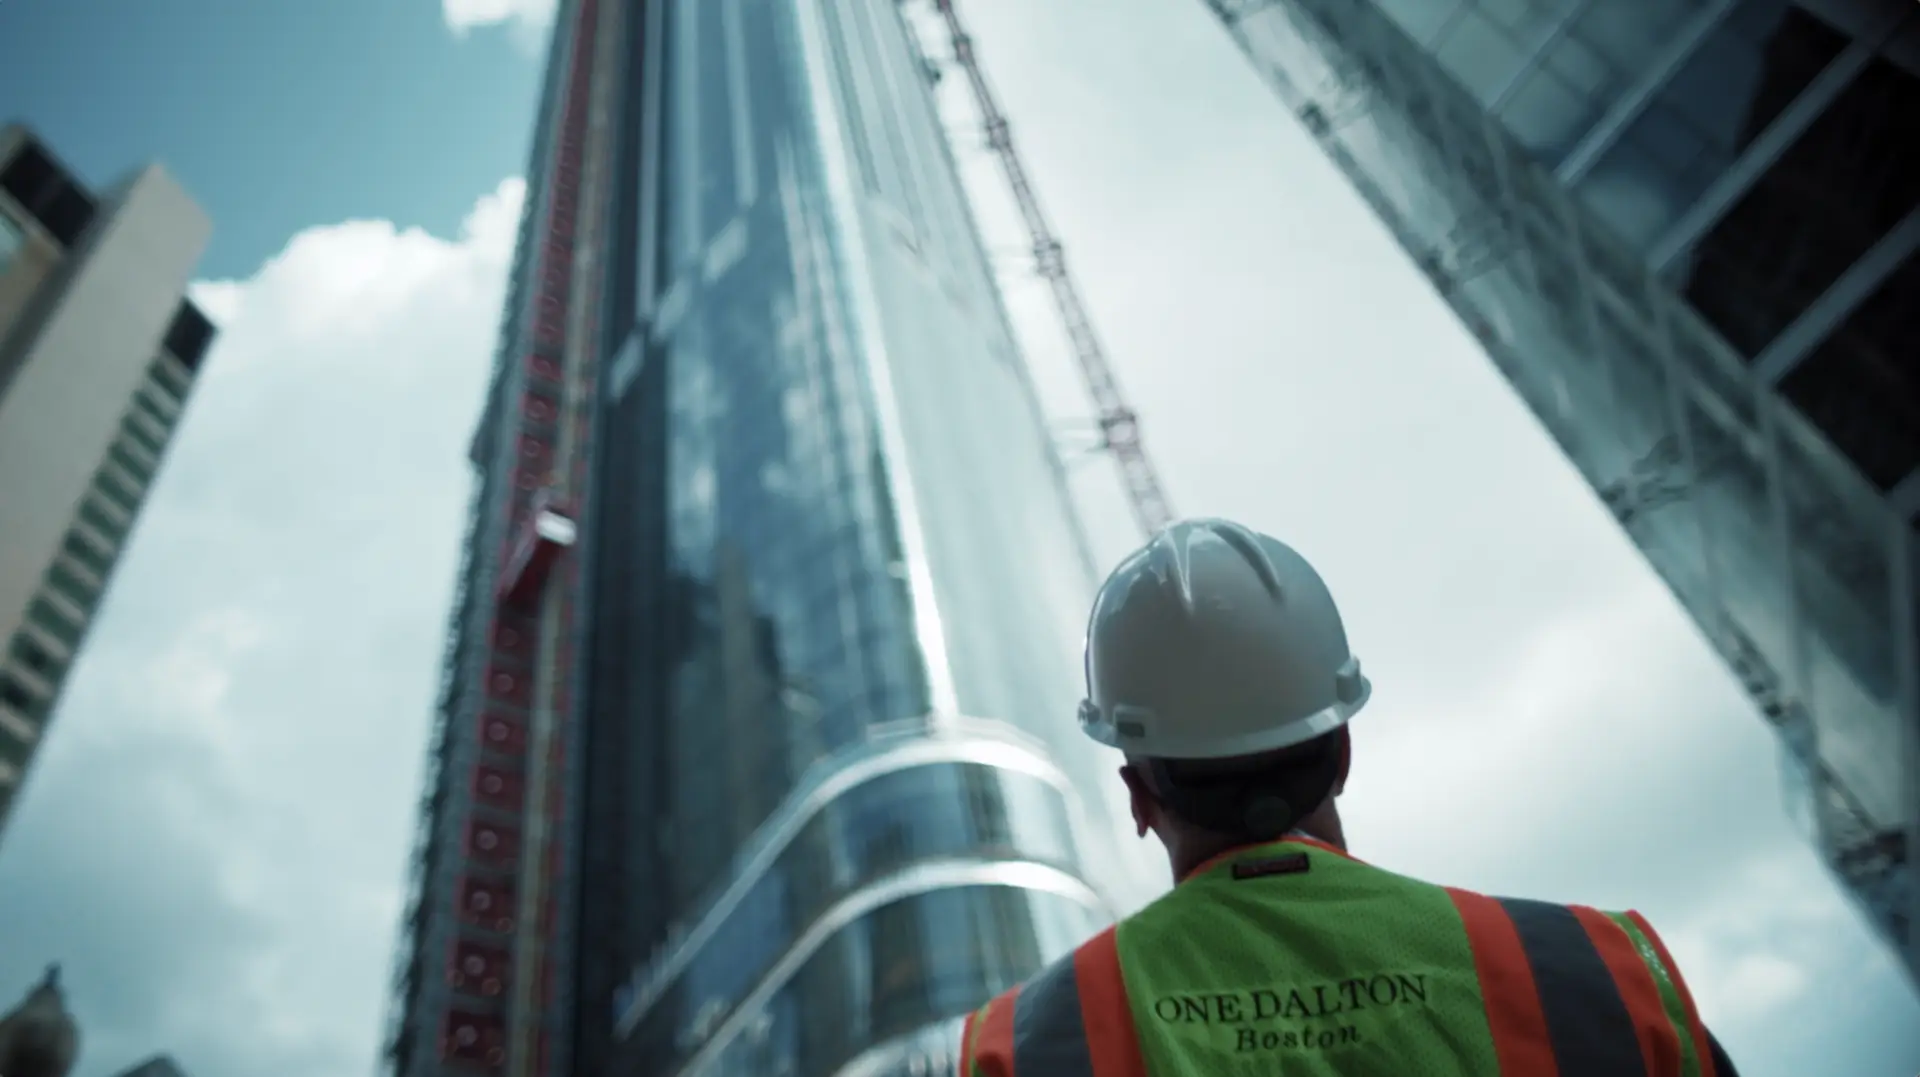 A construction worker is standing in front of a tall building for an NBC Boston image spot.